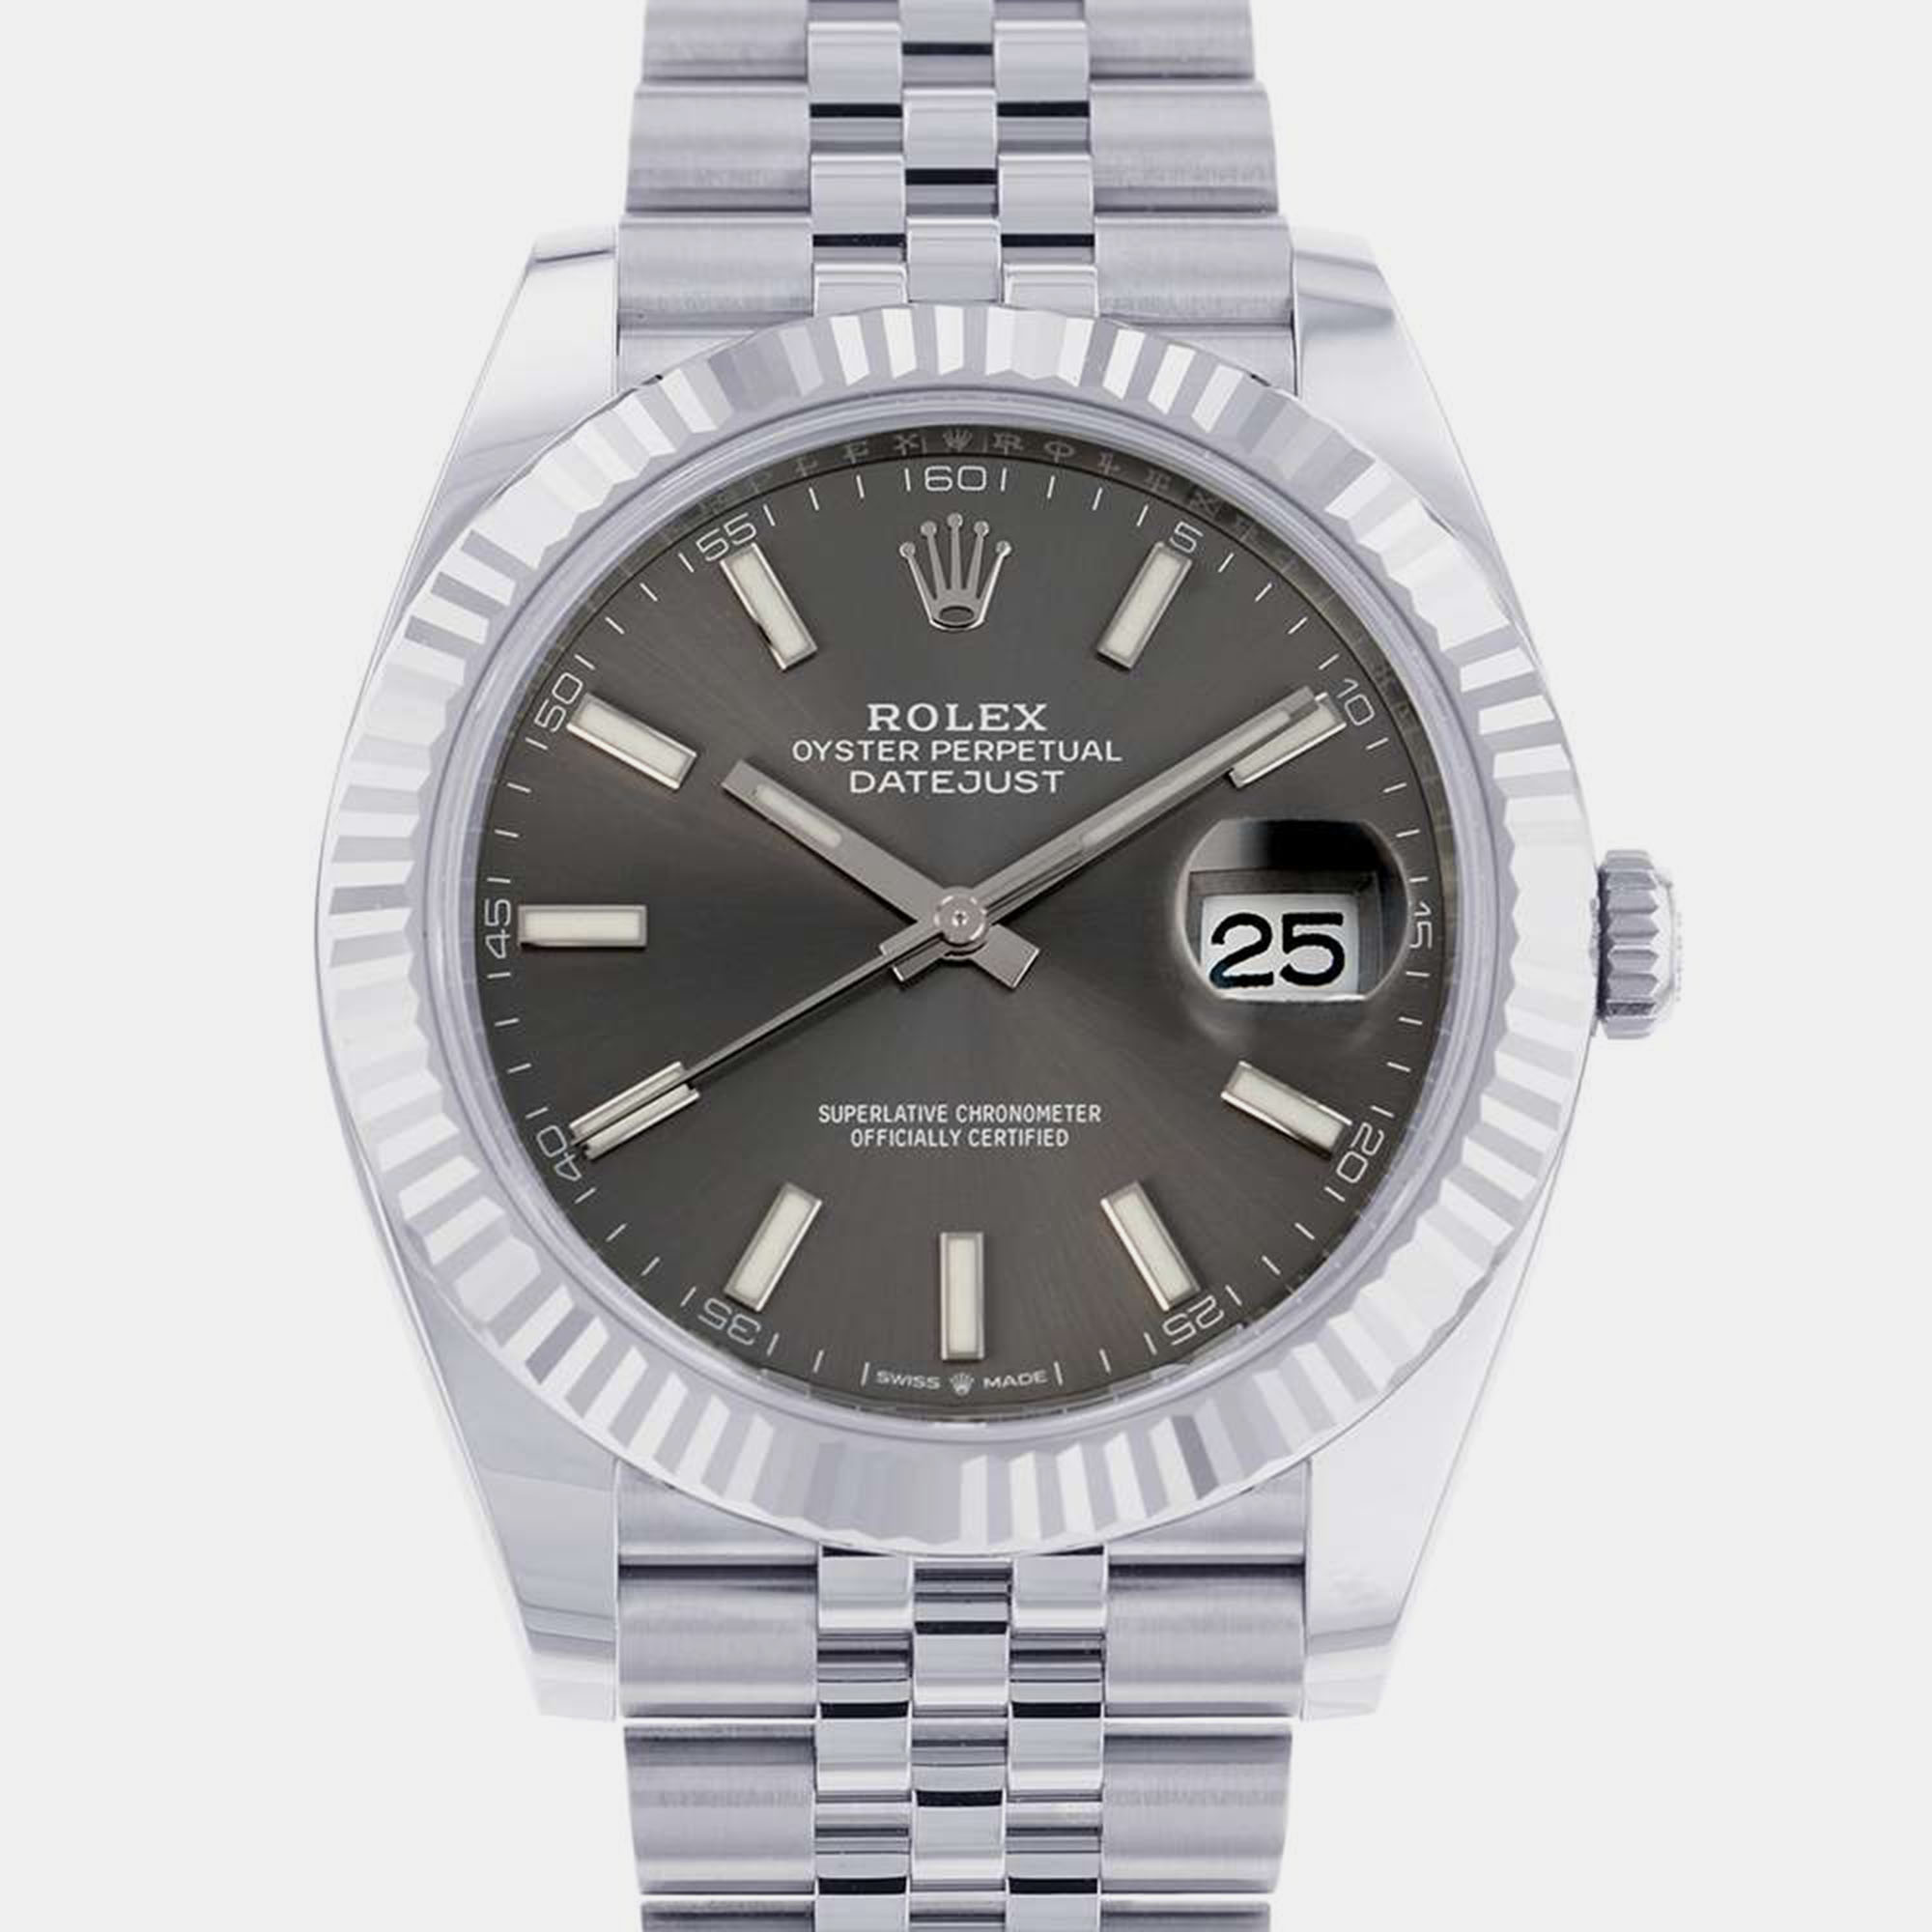 

Rolex Grey 18k White Gold And Stainless Steel Datejust 126334 Automatic Men's Wristwatch 41 mm